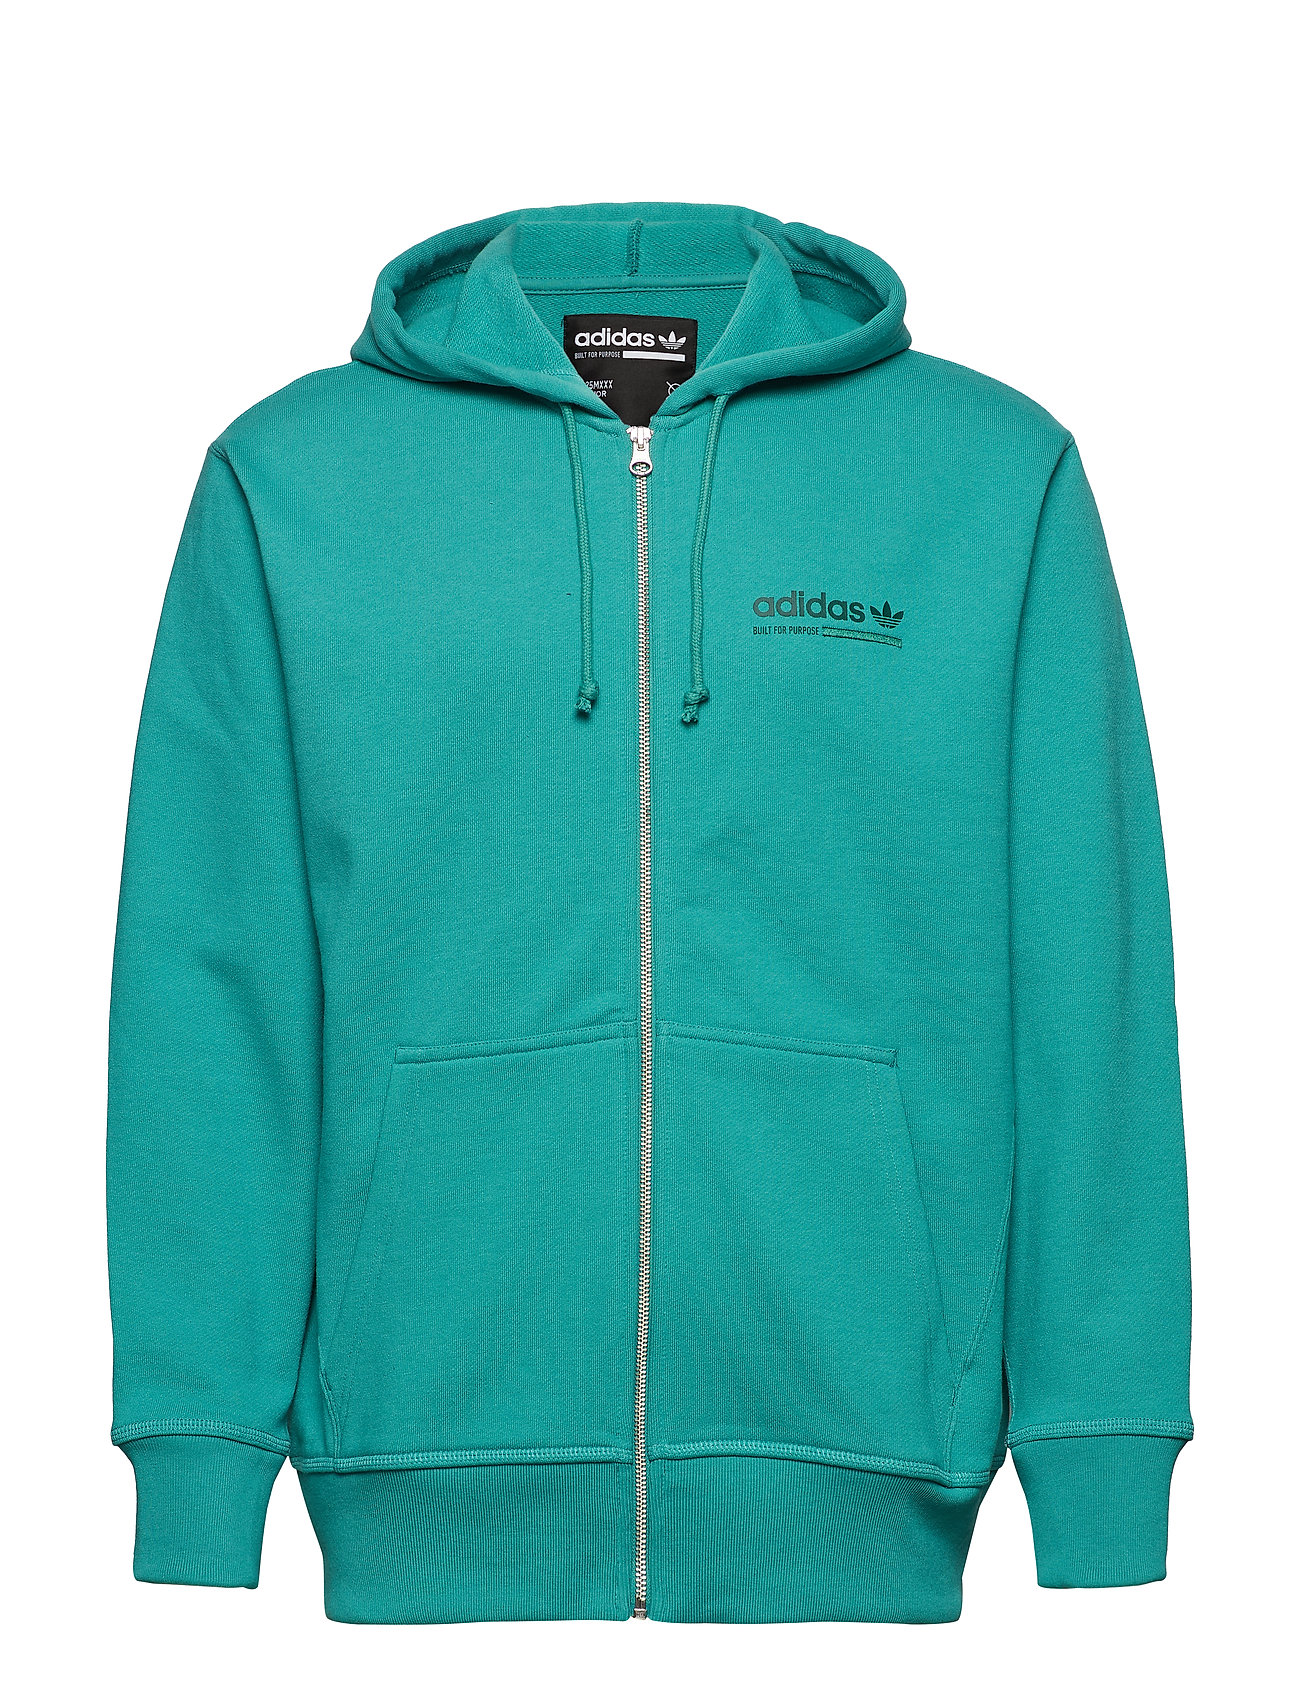 adidas Originals Fz Hoody (Trugrn), (33.98 €) | Large selection of  outlet-styles | Booztlet.com